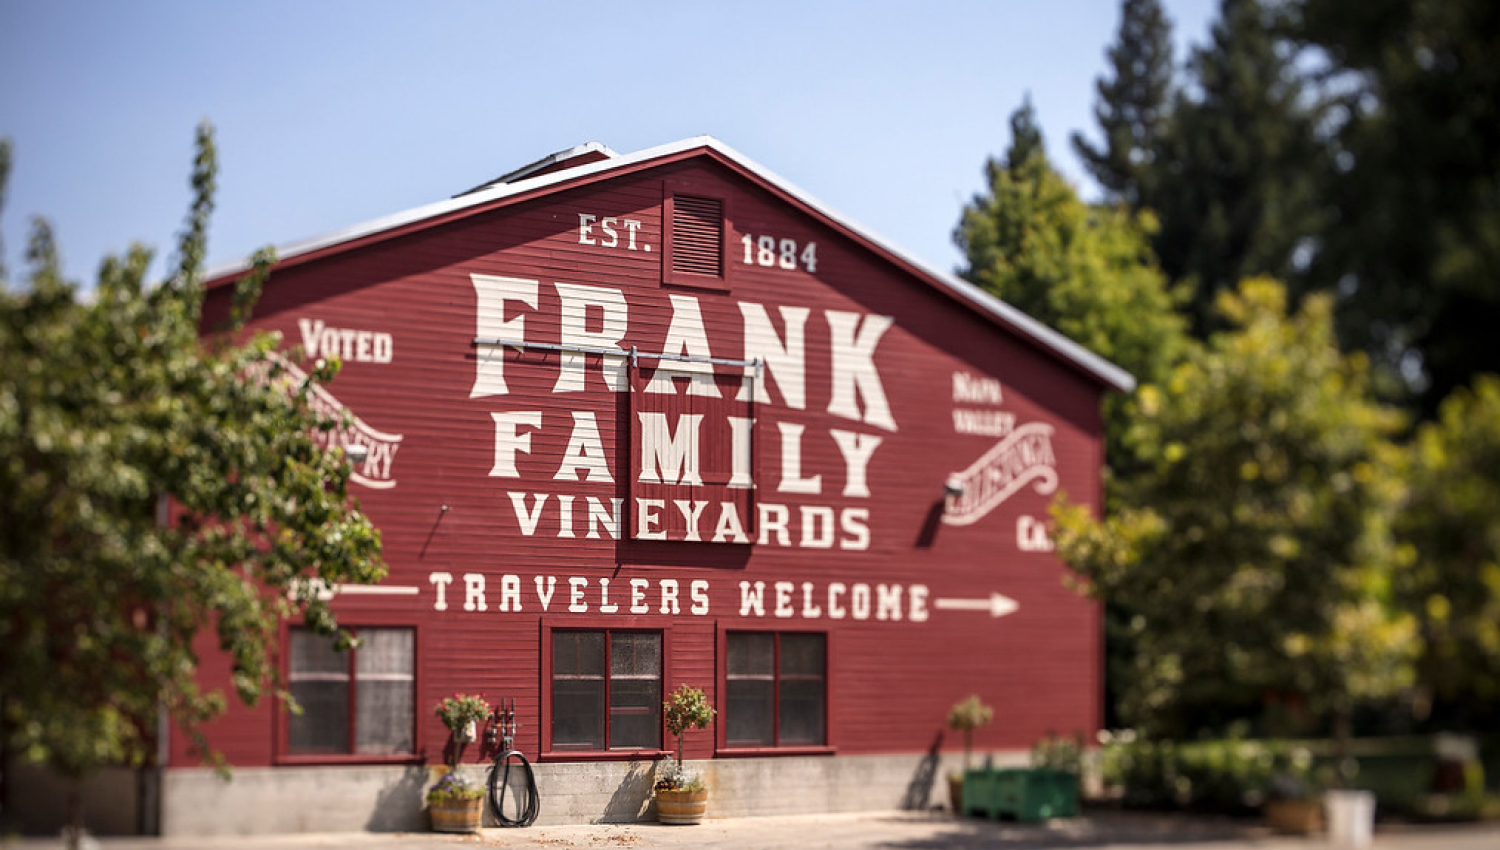 image shows the front of Frank Family Vineyards red barn